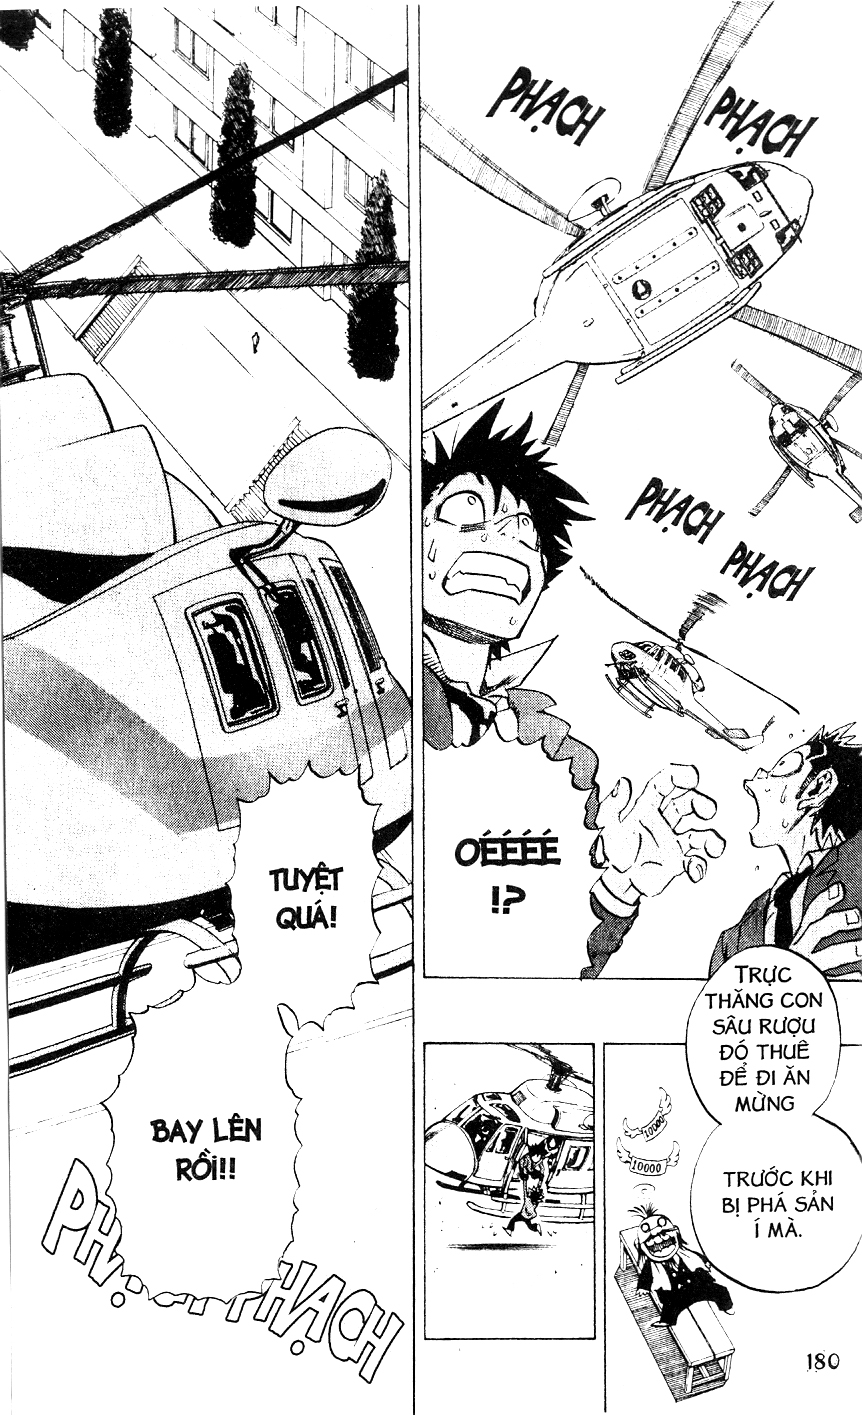 eyeshield 21 20 vostfr - Search and Download